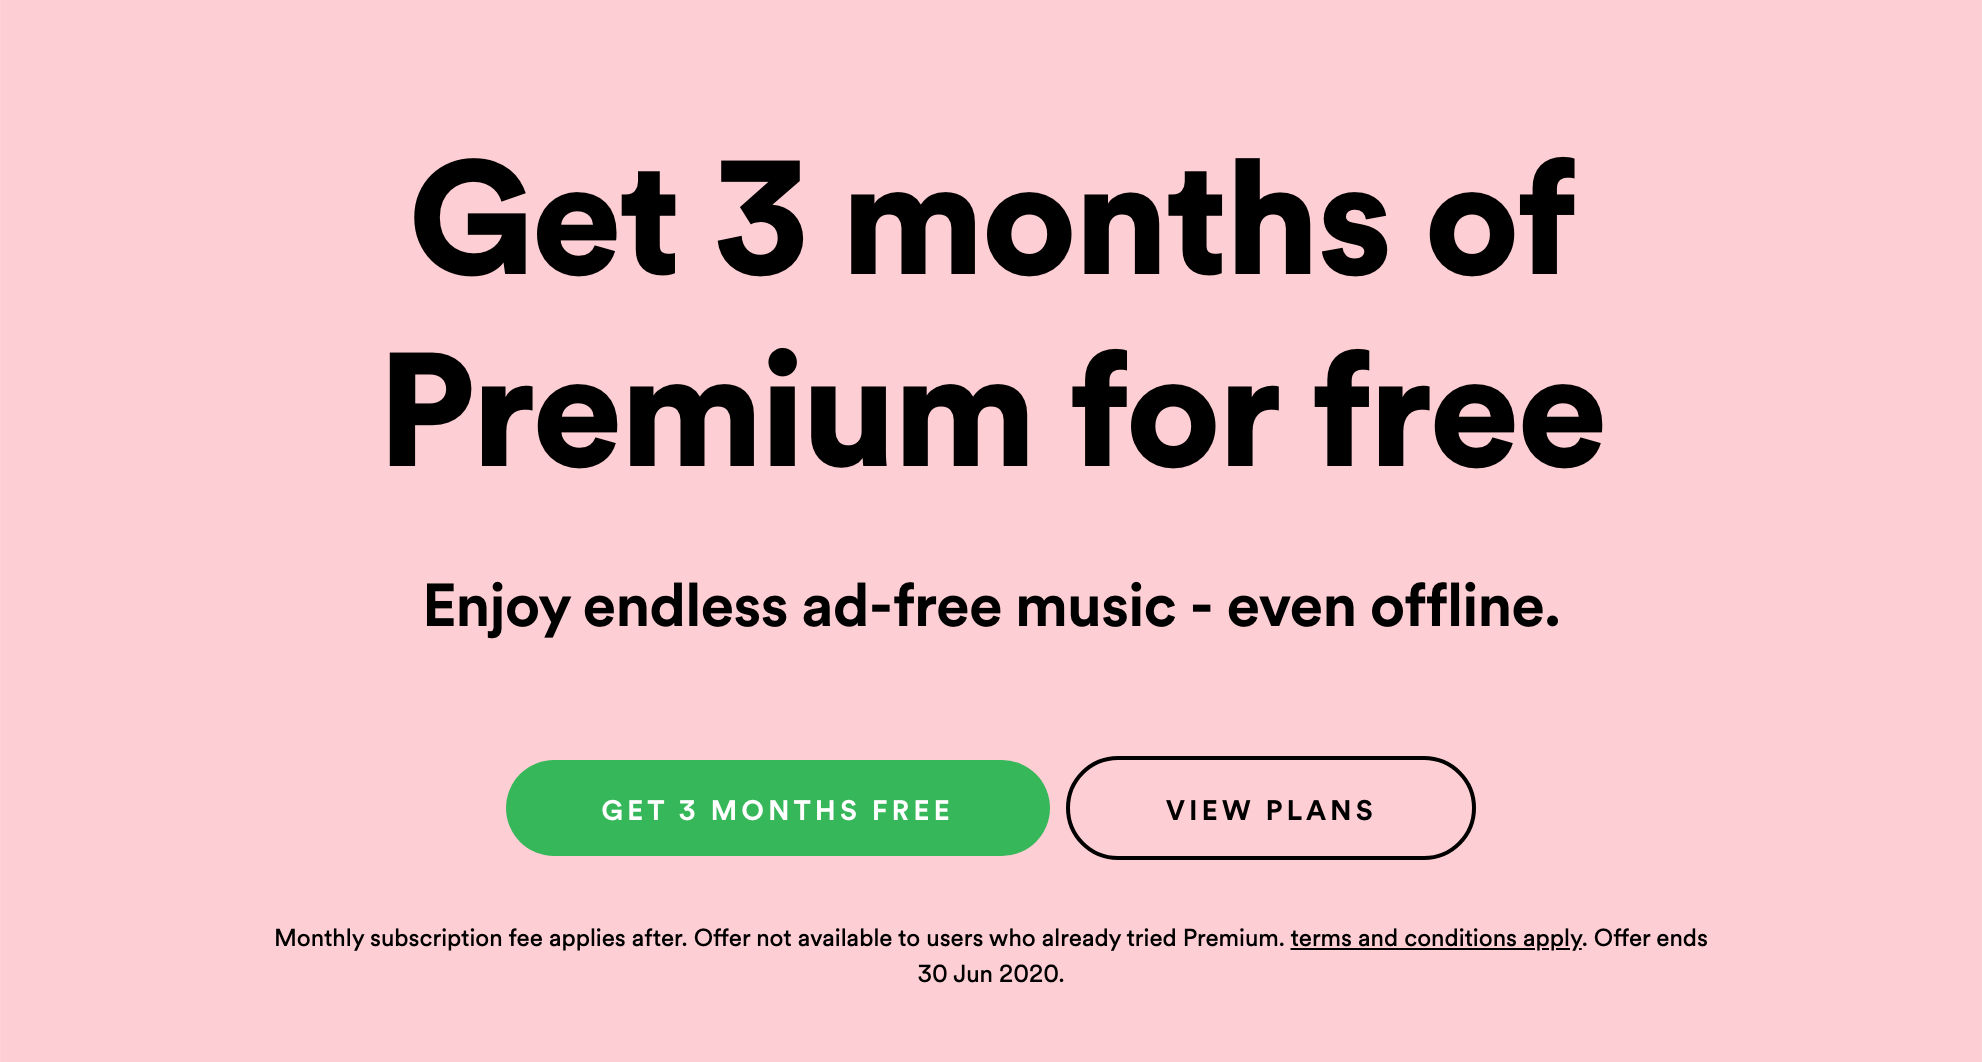 How to get three months of Spotify Premium for free